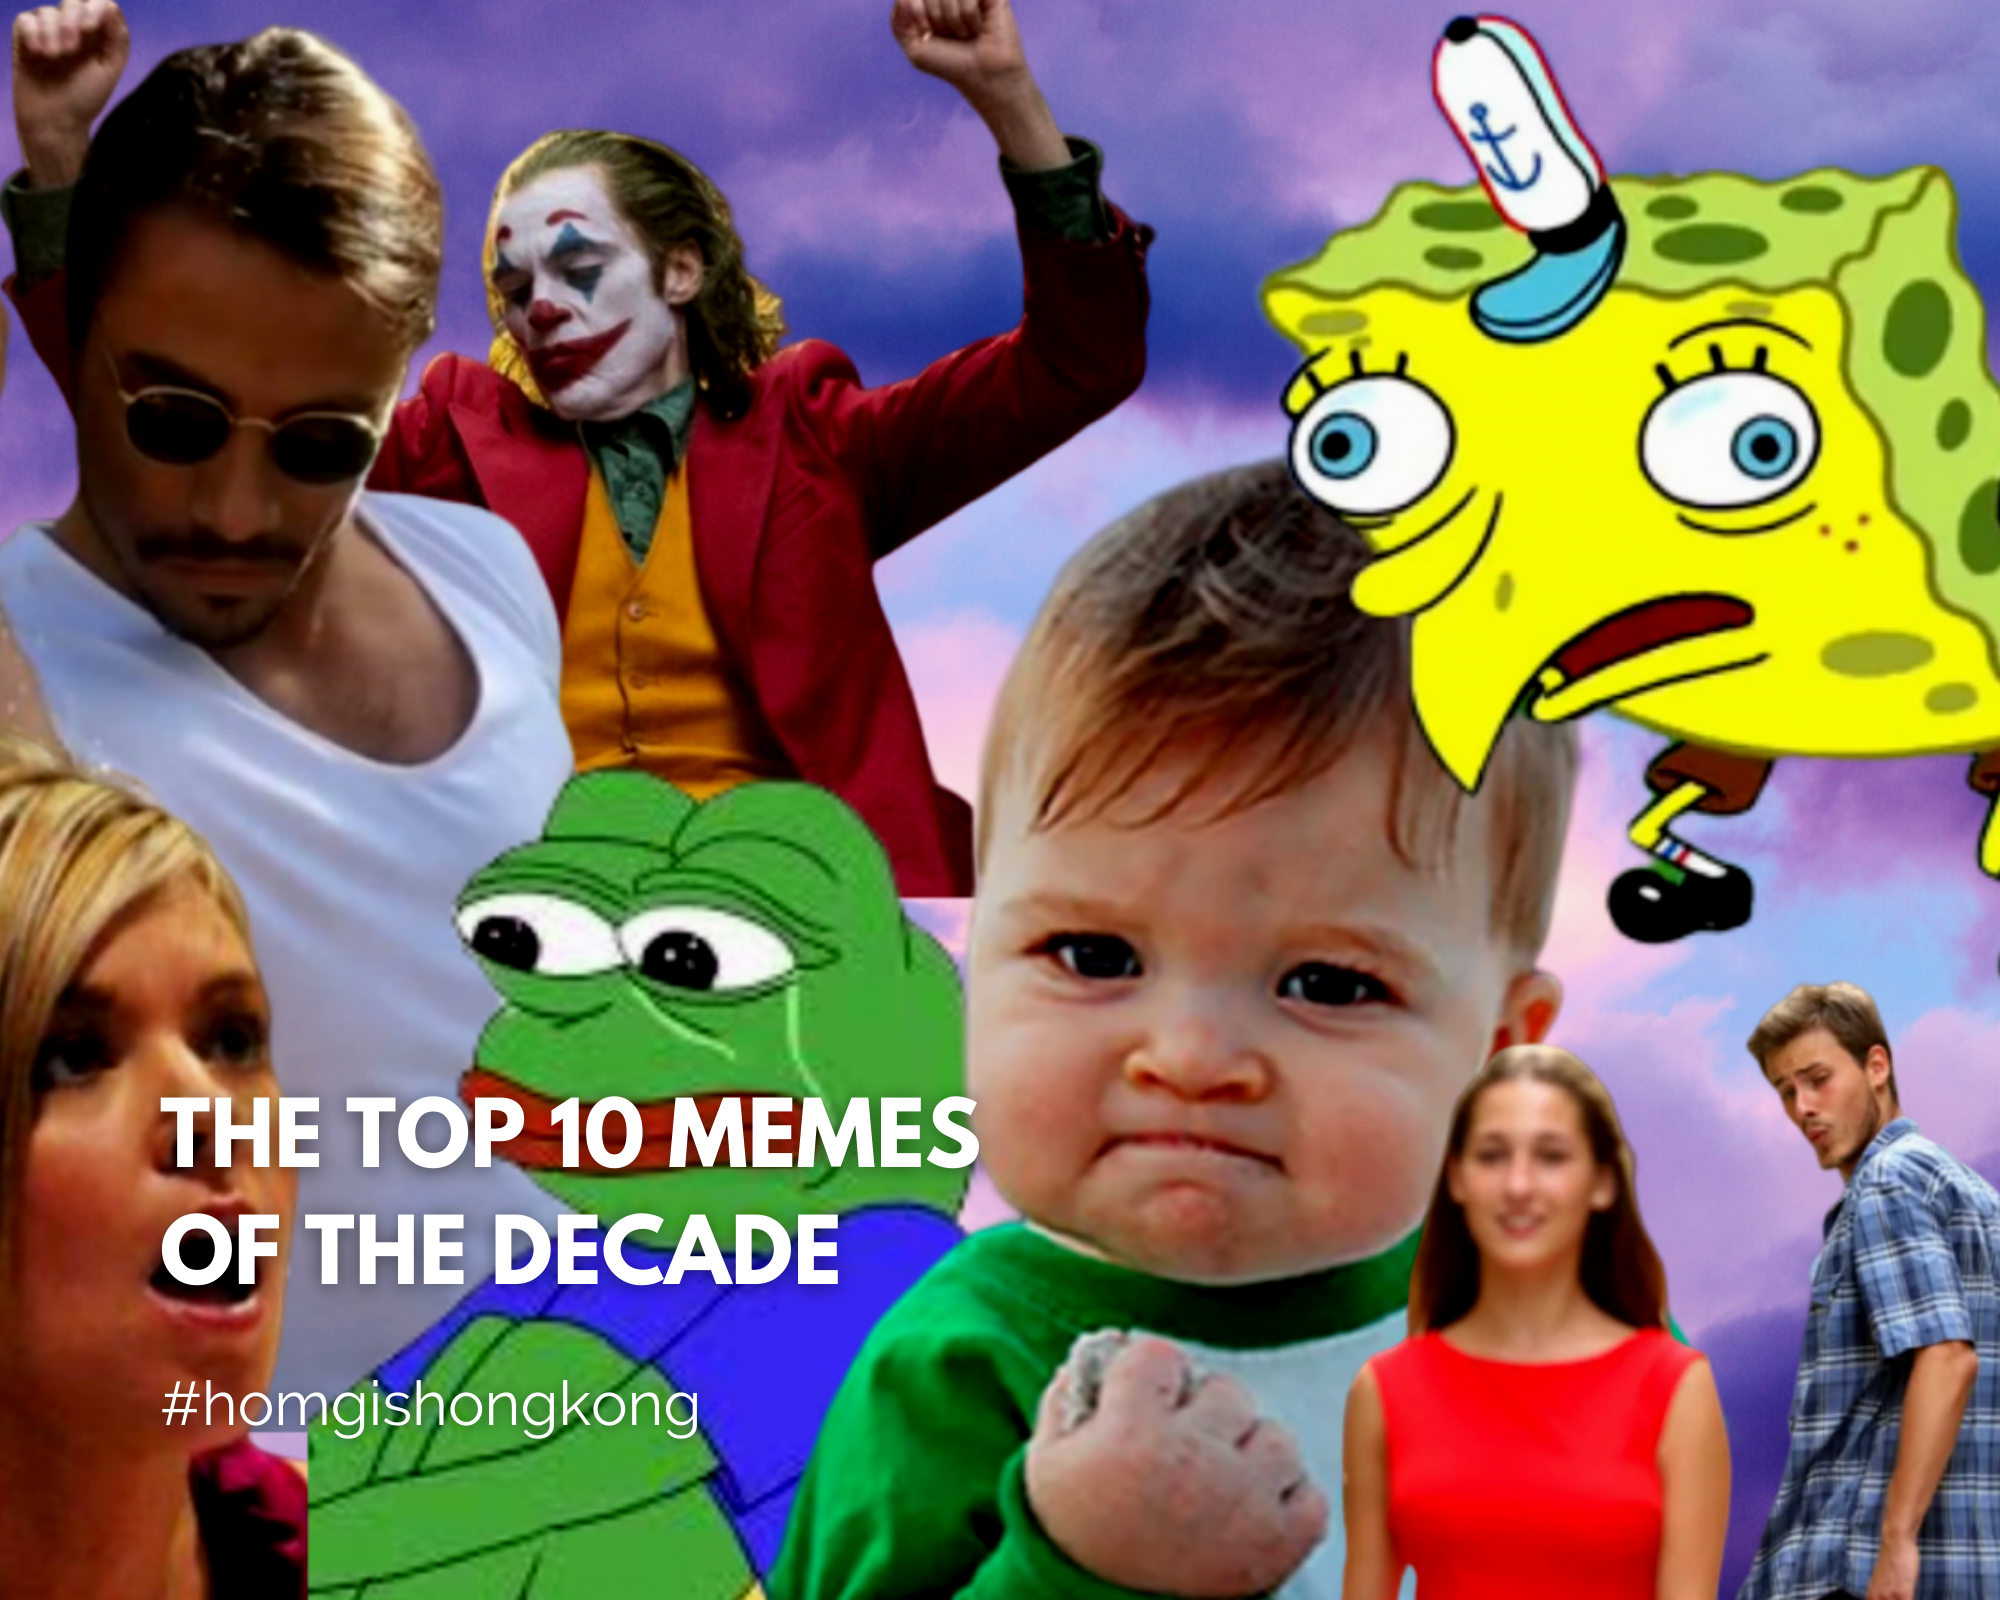 The Top 10 Memes of the Decade